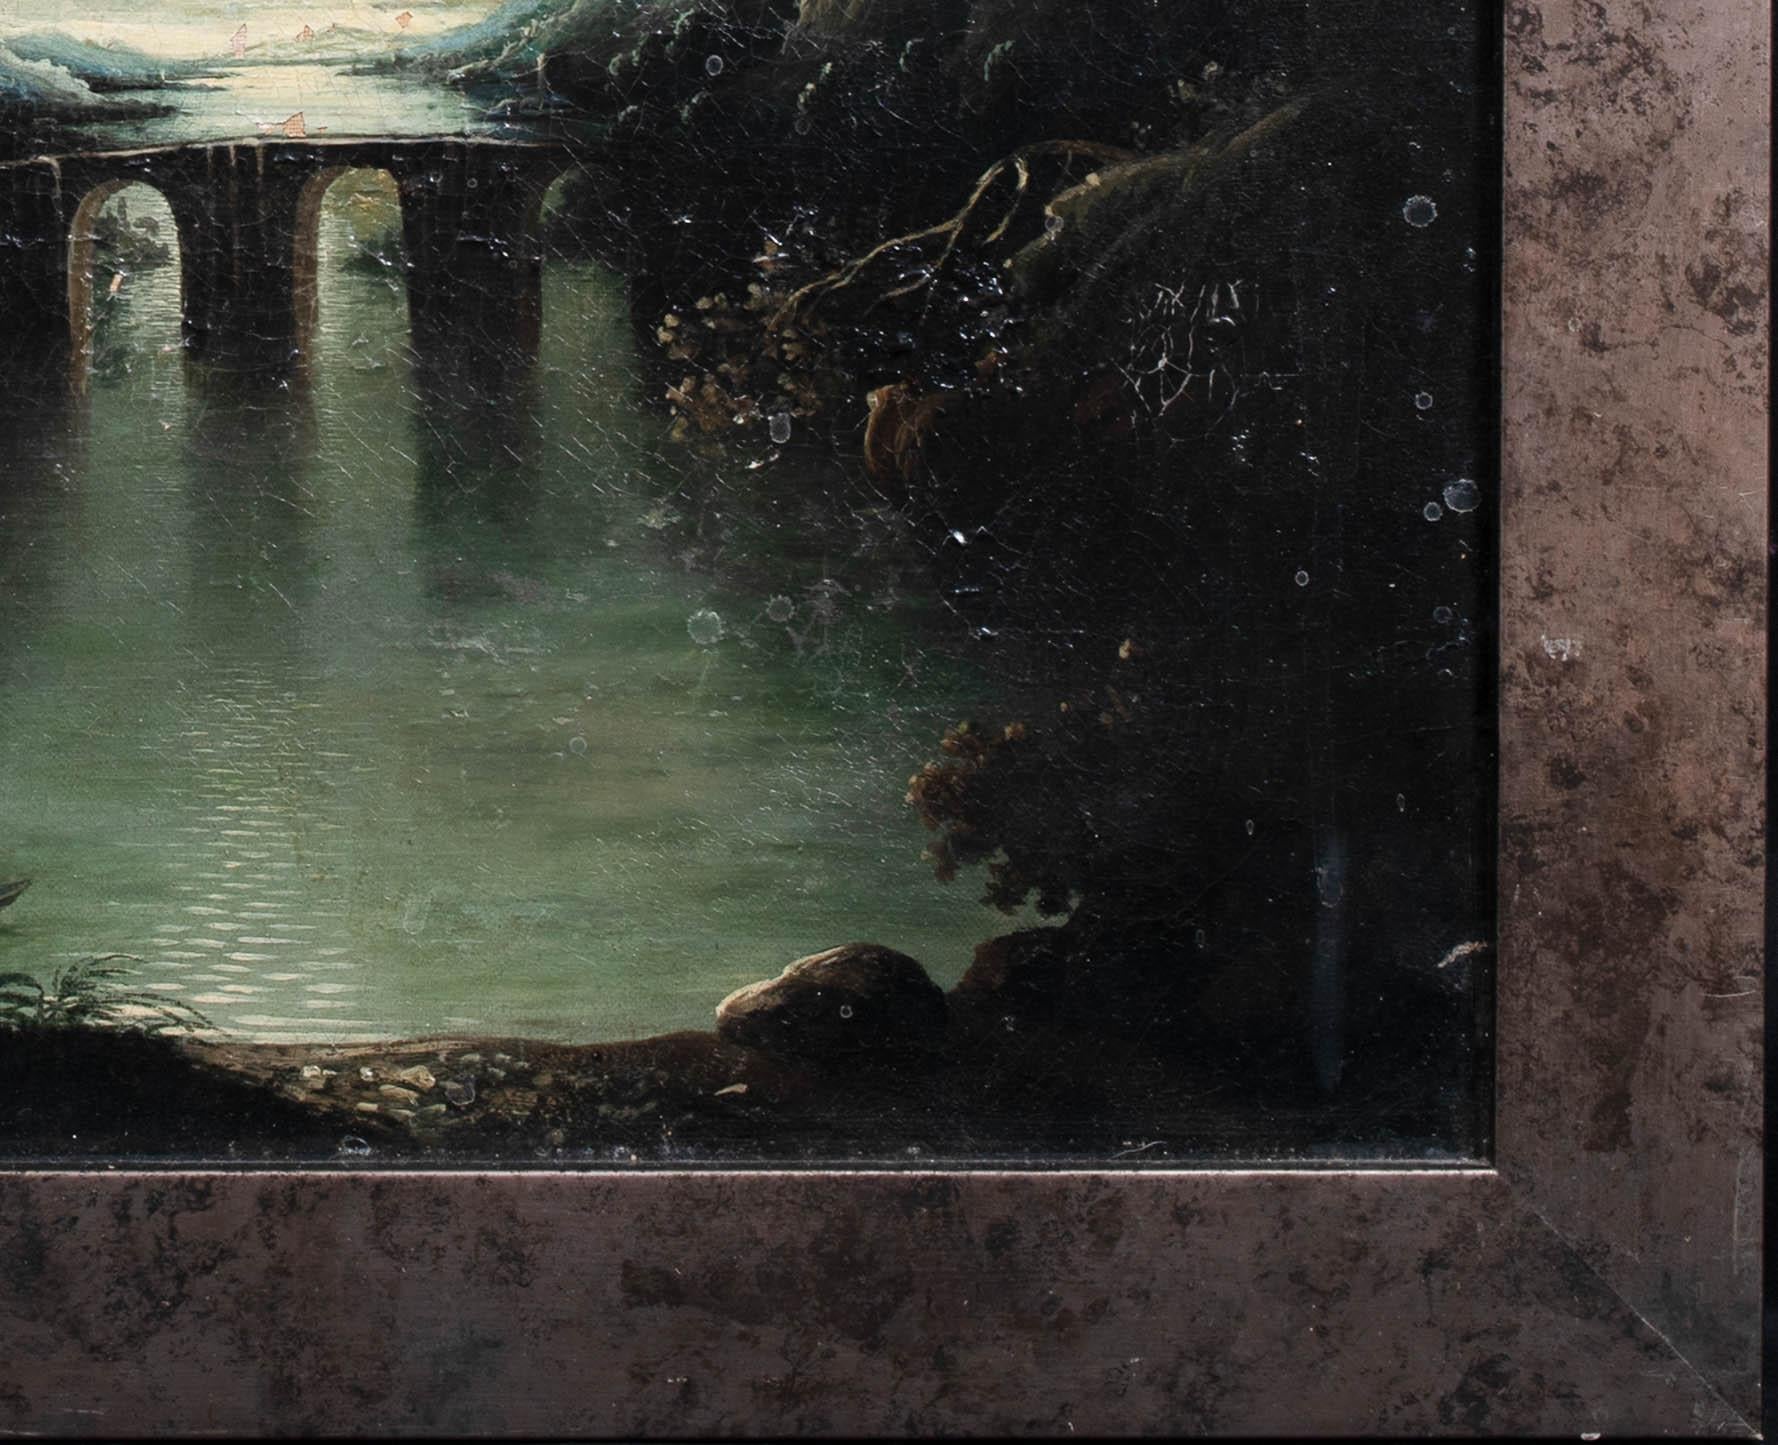 Moonlit River Landscape, 19th Century

Circle of Sebastian PETHER (1790-1844)

Large 19th Century English norturne of a moonlit river landscape, oil on canvas. Excellent quality and condition extensive view of figures overlooking a moonlit river